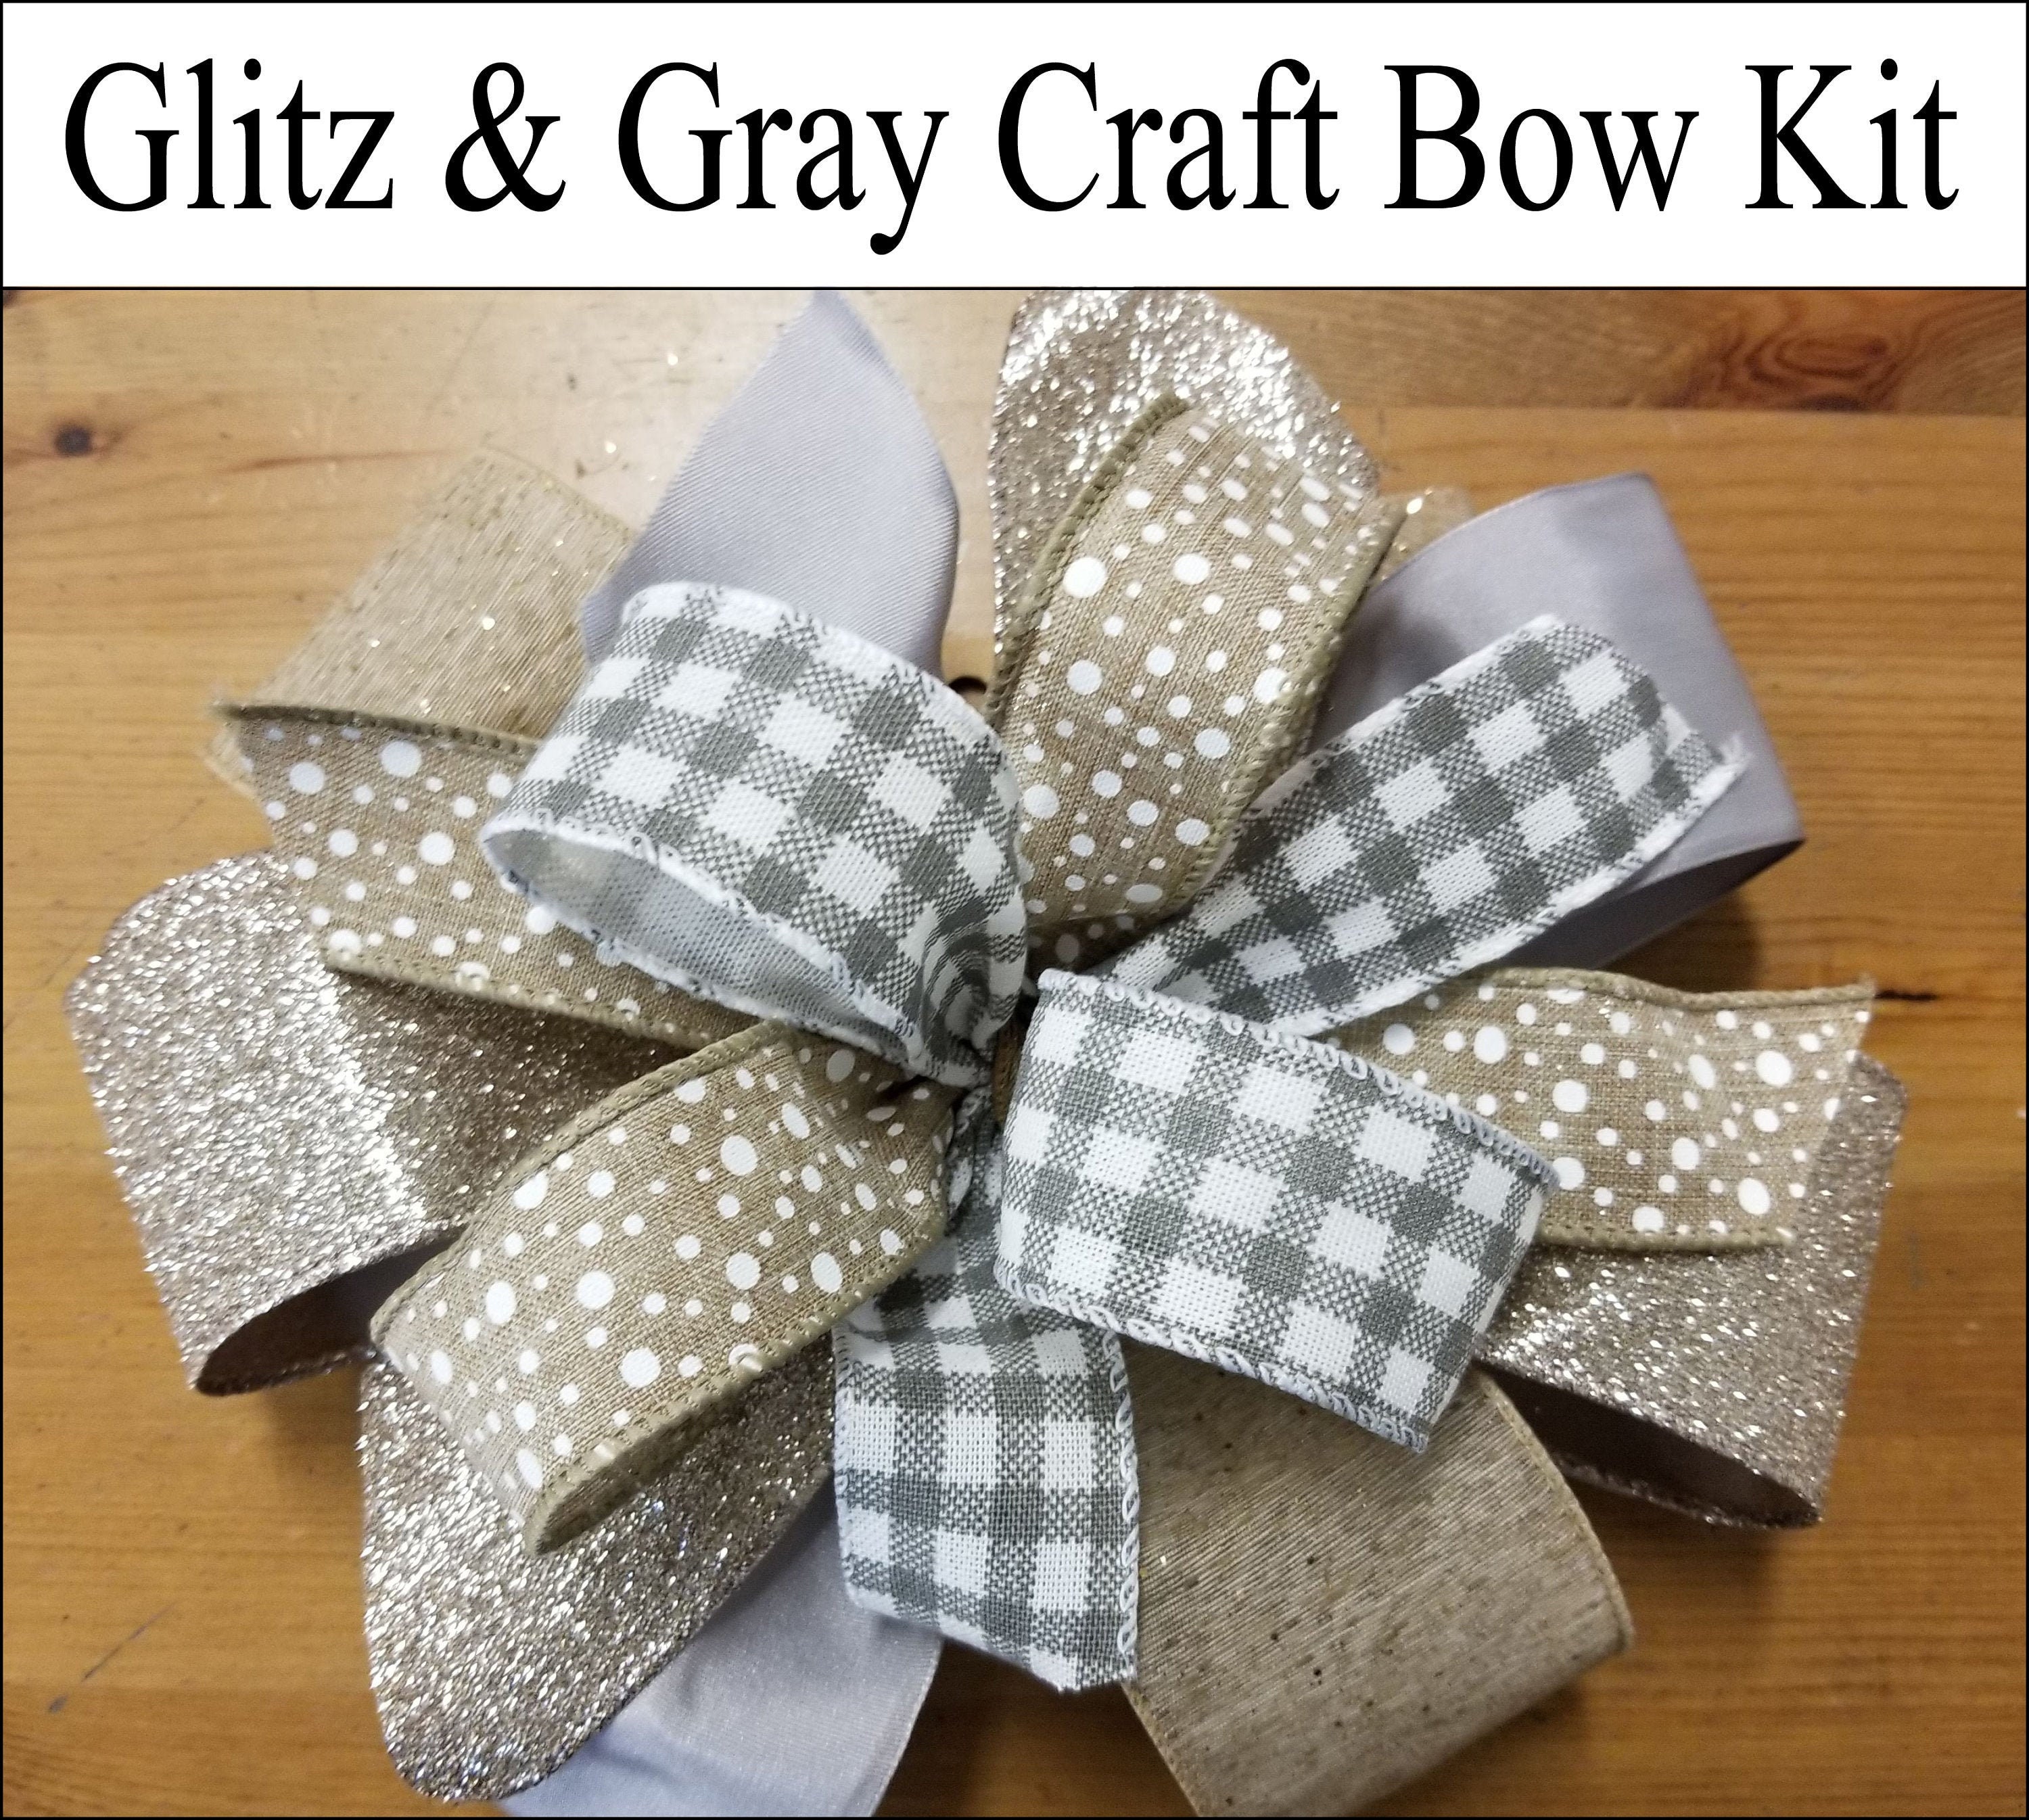 Easy Bow Making Kit, Spring Bow Kit, How to Make a Bow by Hand, Wreath Bow  Kit 